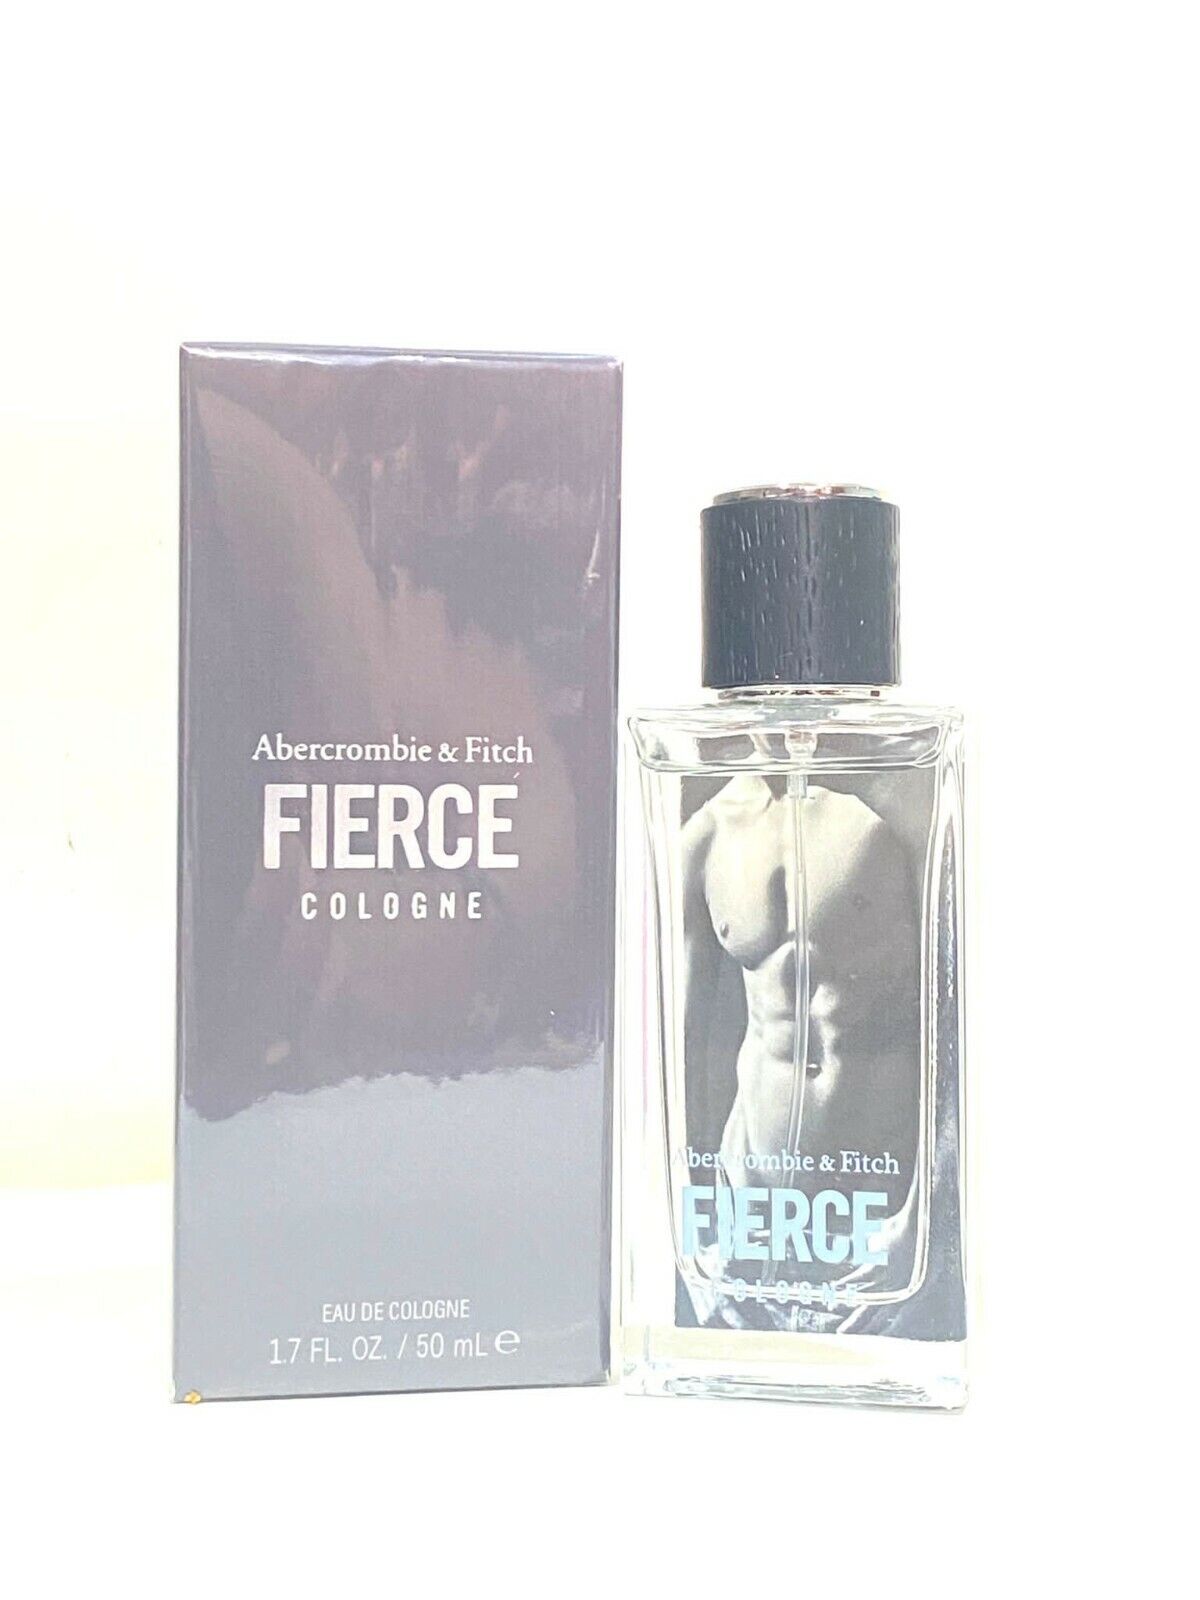 Abercrombie & Fitch Fierce for Men Cologne Spray 1.7 oz / 50 ml New In Box